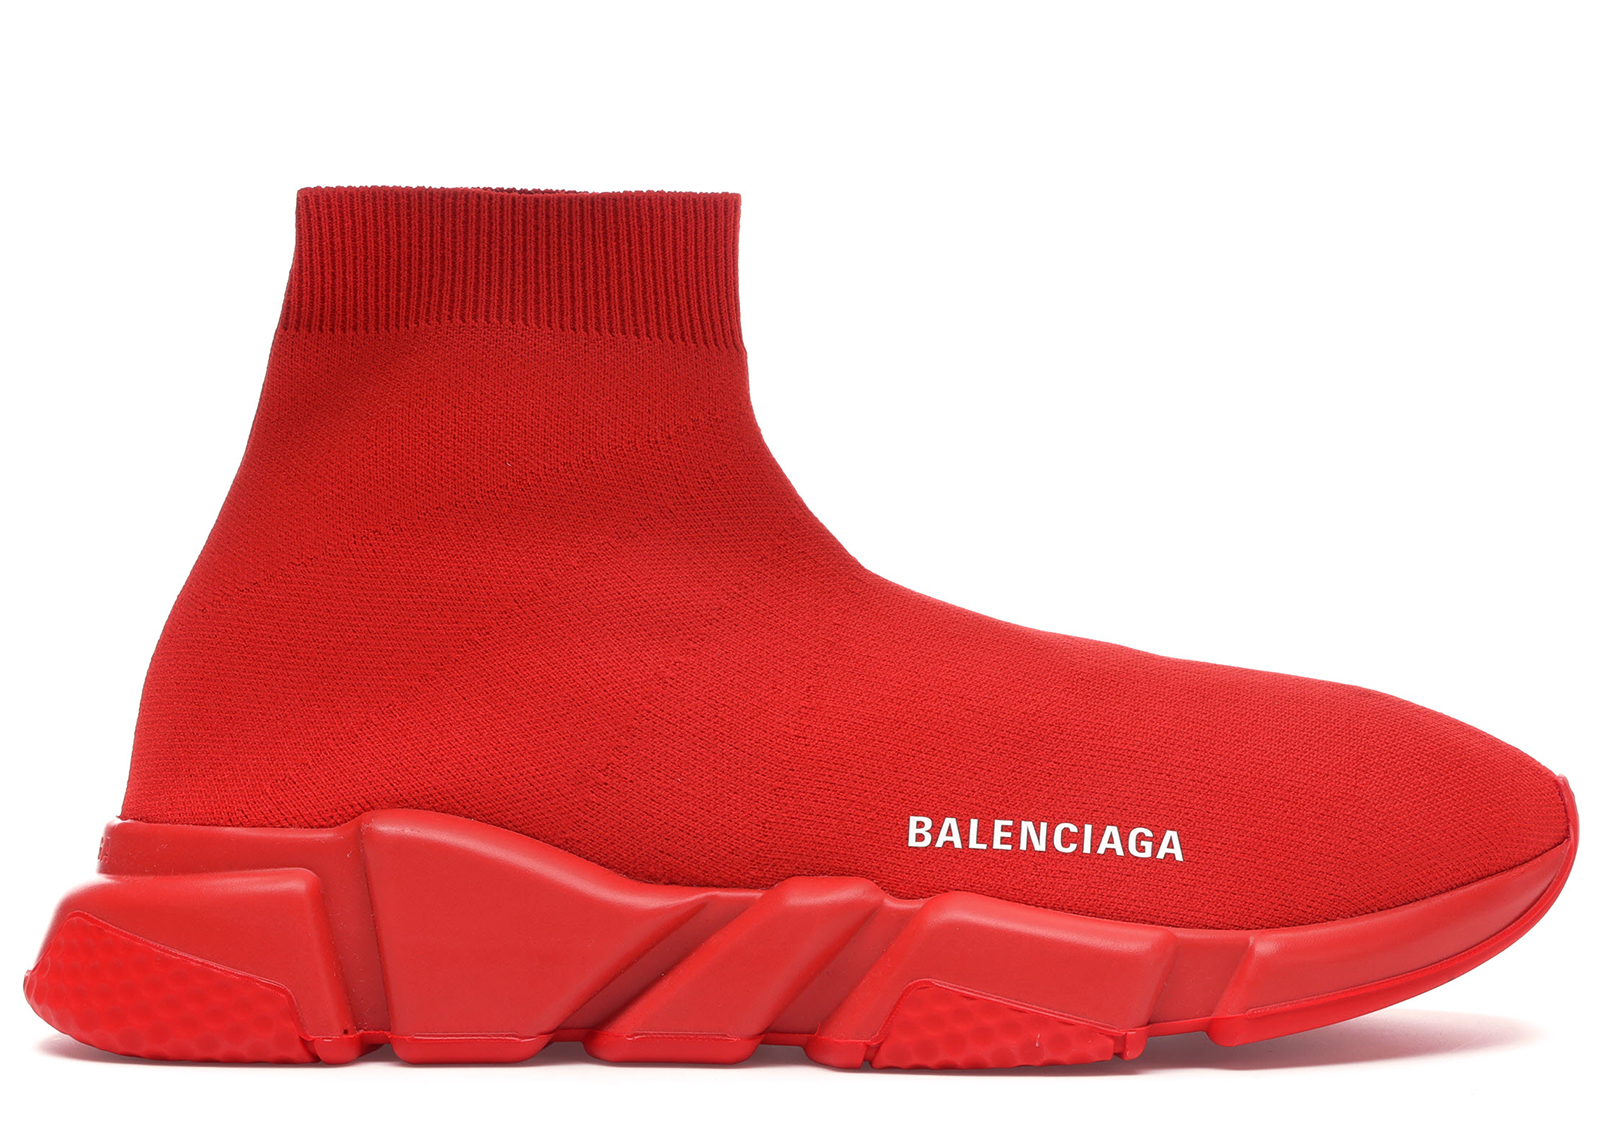 Red Balenciaga Shoes Men  Buy Top Styles To Make A Style Statement   Editorialist